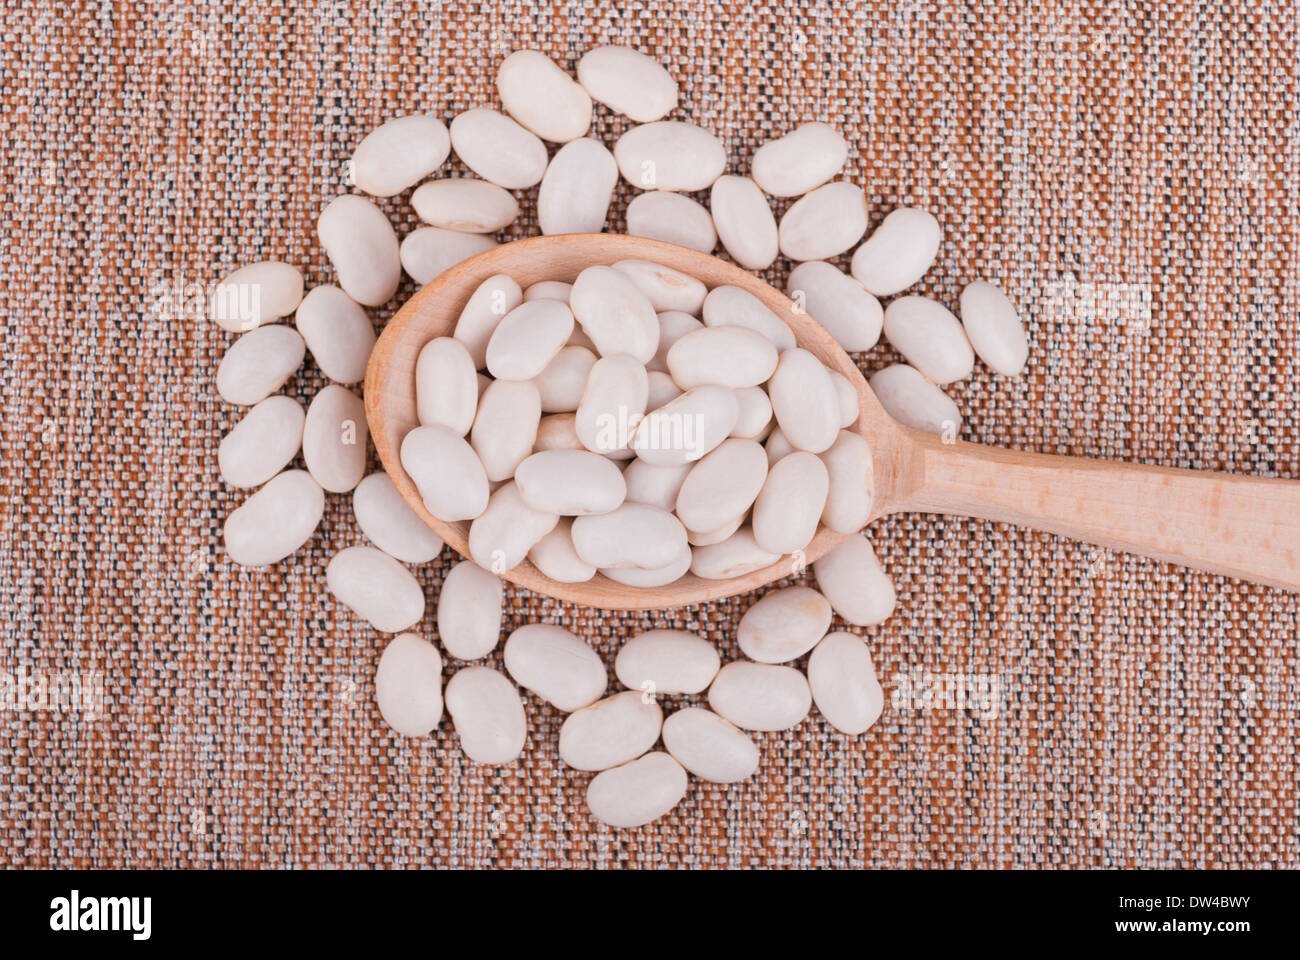 Legume leguminous High Resolution Stock Photography and Images - Alamy